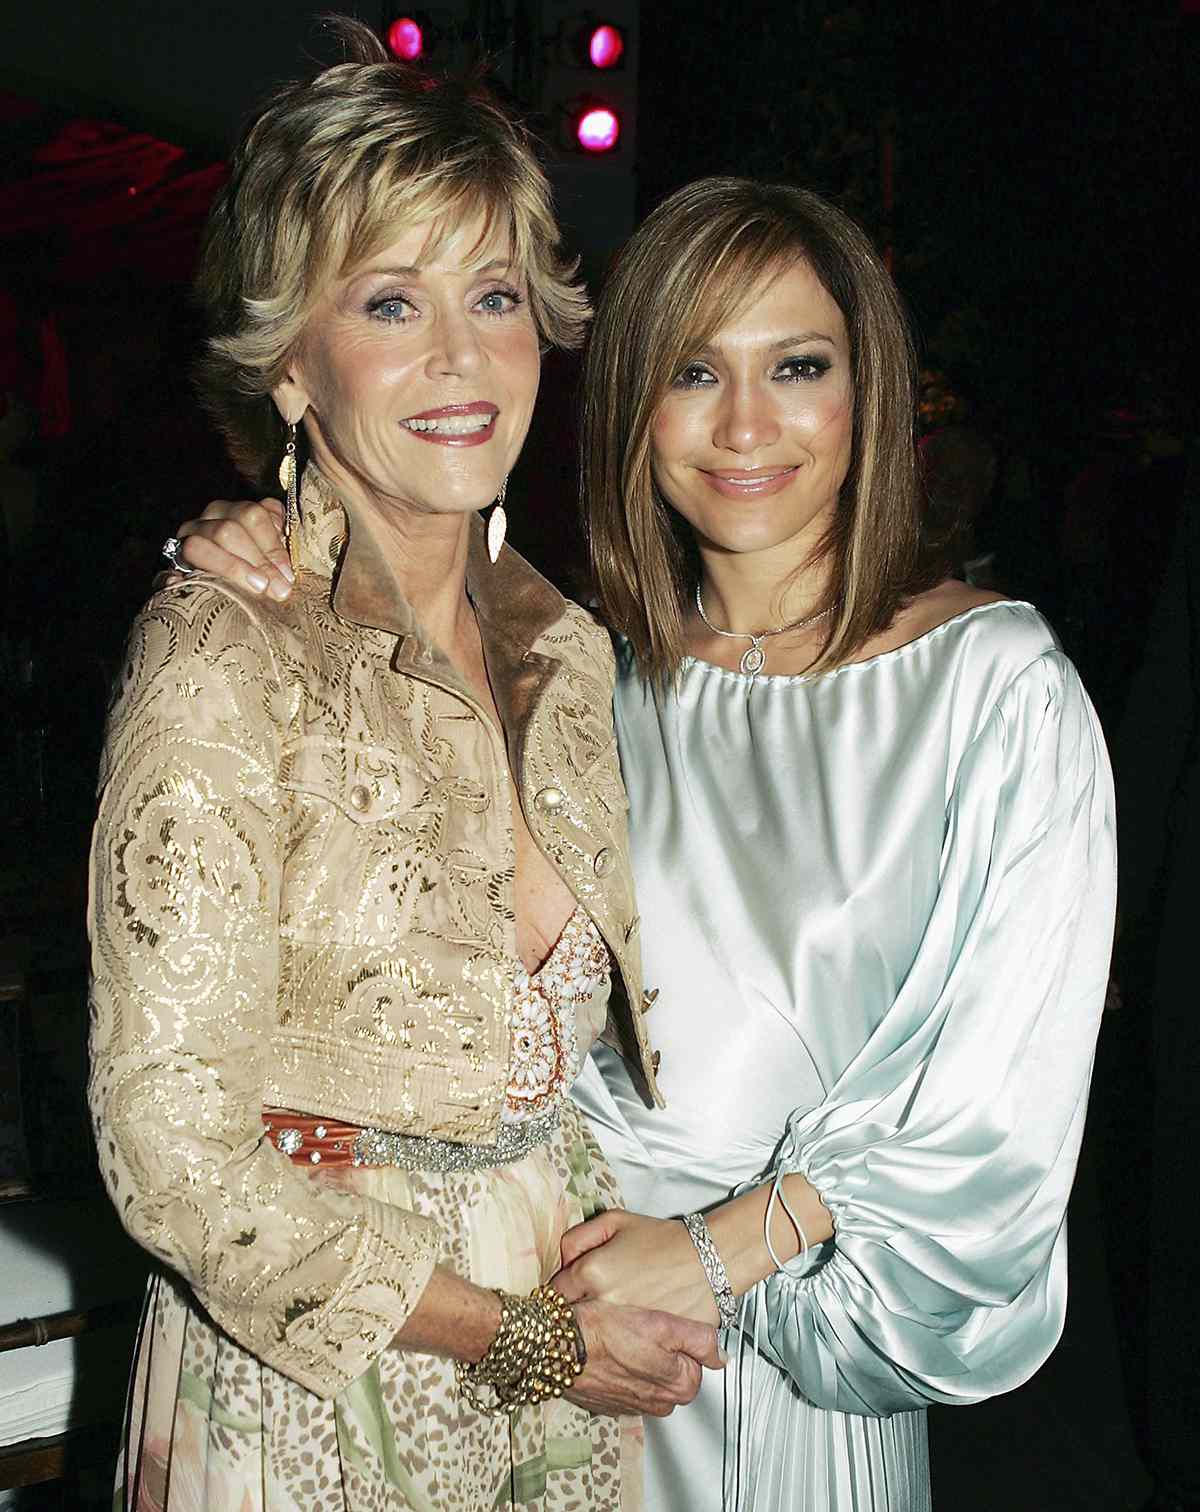 Actors Jane Fonda (L) and Jennifer Lopez pose at the afterparty for the premiere of New Line Cinema's "Monster-In-Law" at the Armand Hammer Museum on April 29, 2005 in Los Angeles, California